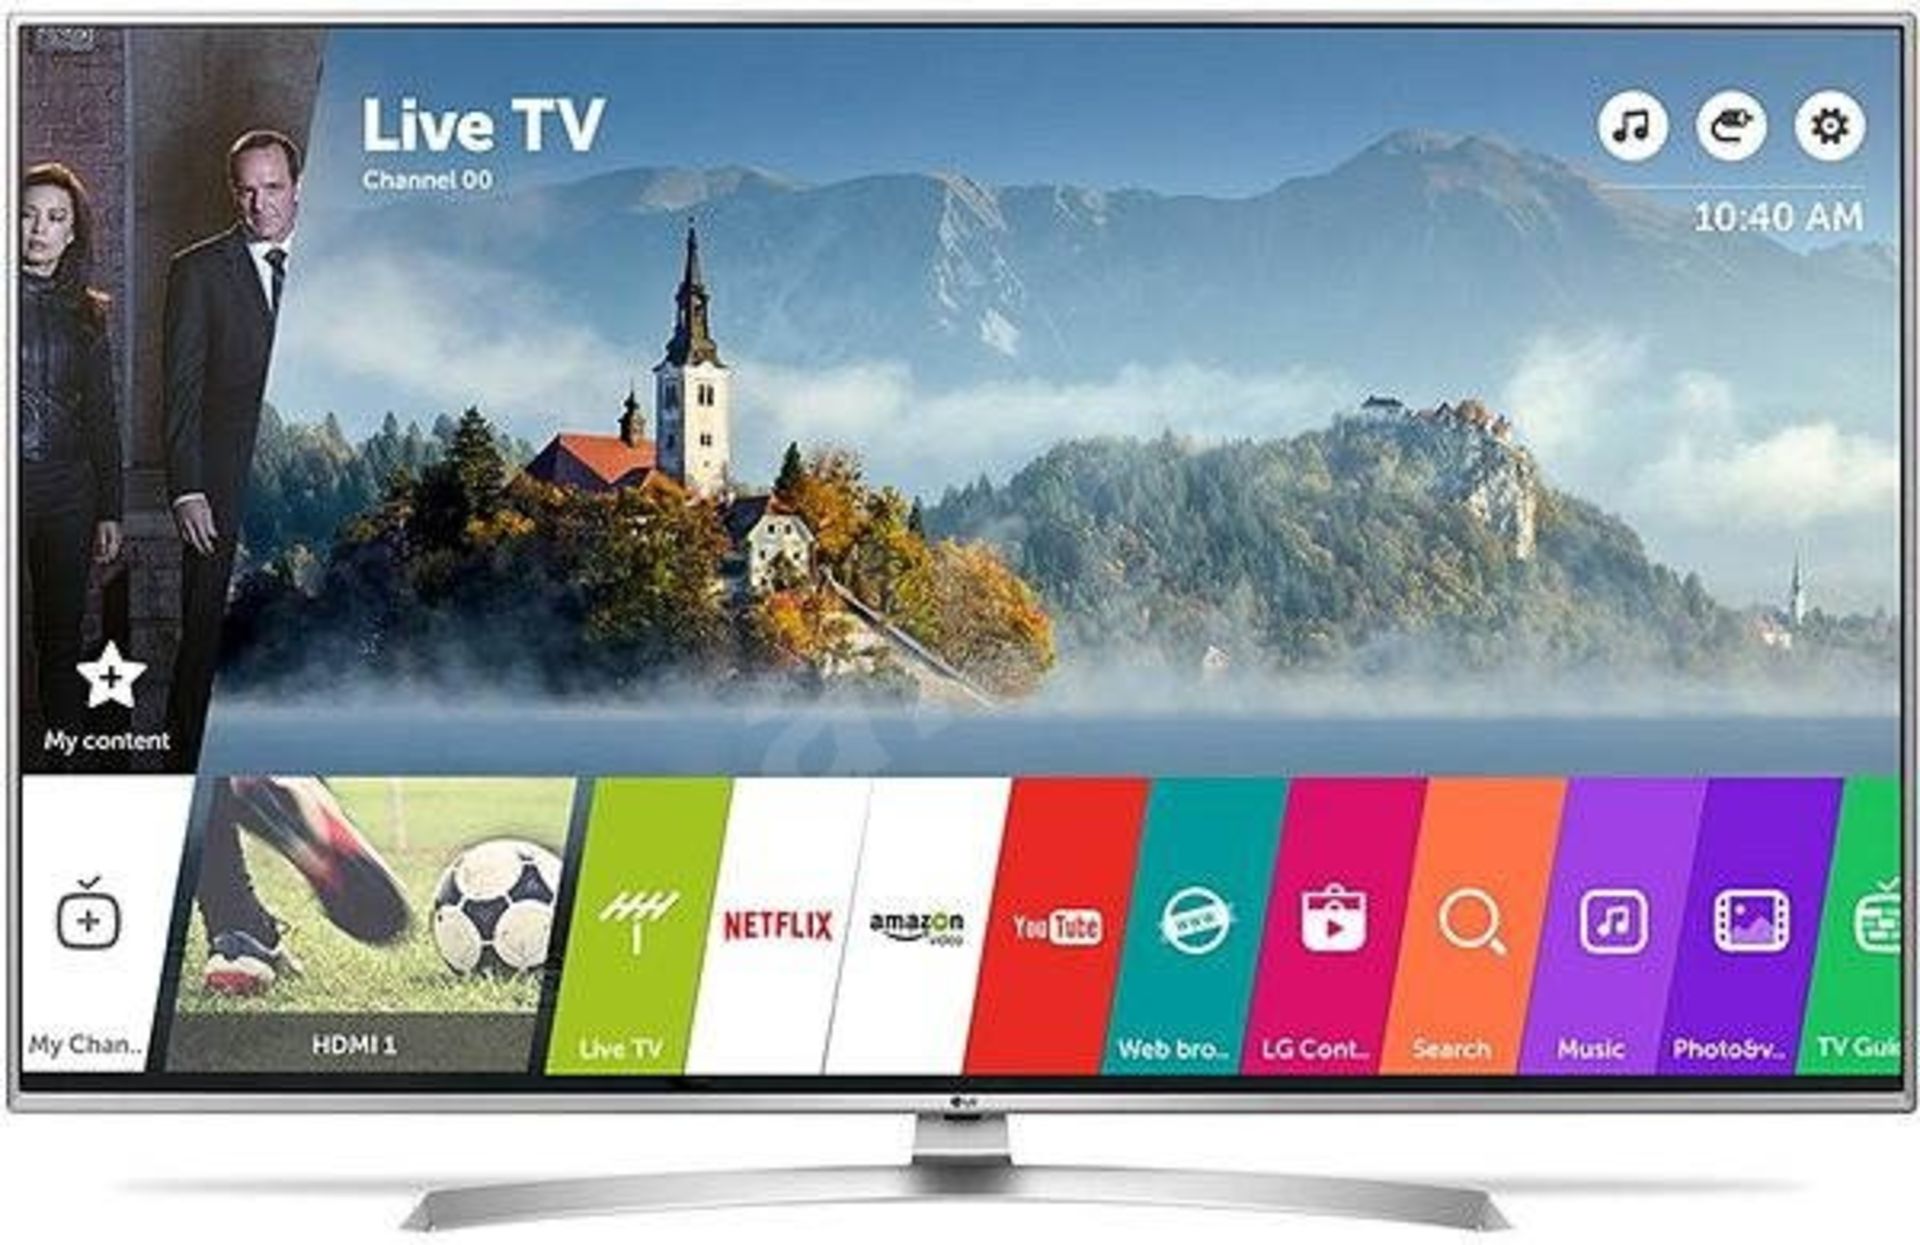 V Grade A LG 49 Inch ACTIVE HDR 4K ULTRA HD LED SMART TV WITH FREEVIEW HD & WEBOS 3.0 & WIFI